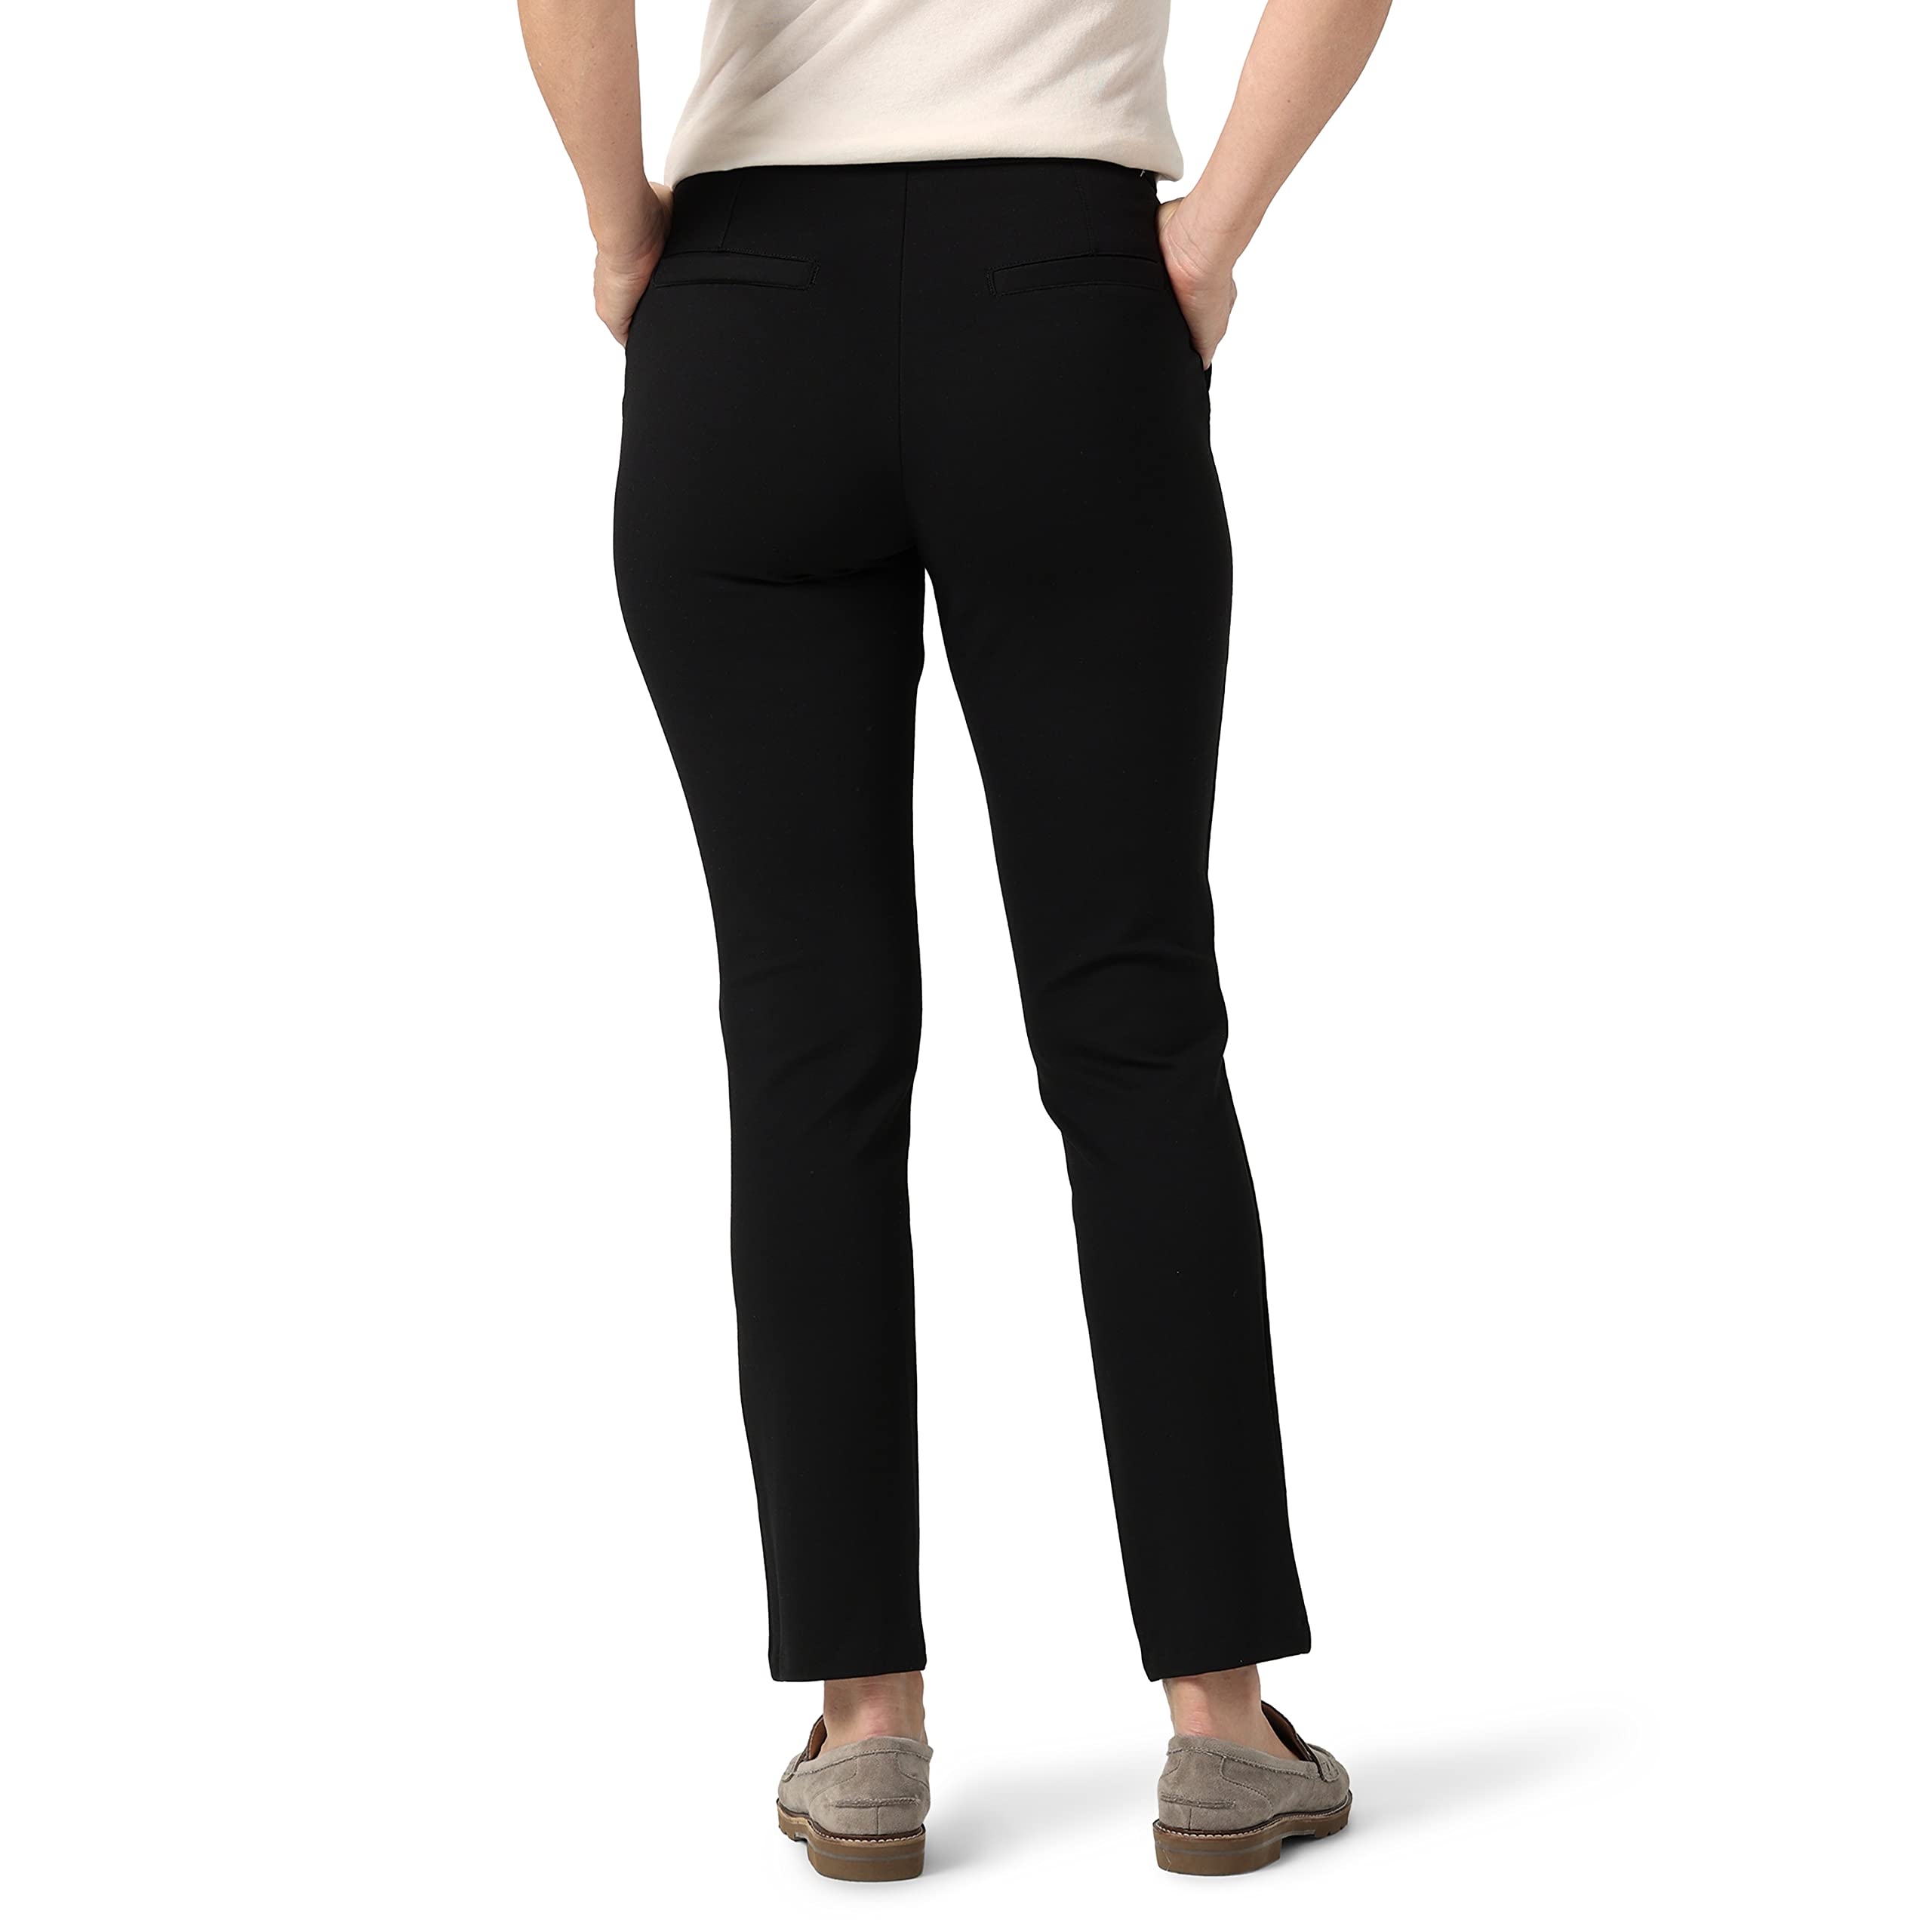 Lee Women's Ultra Lux Comfort Any Wear Slim Ankle Pant